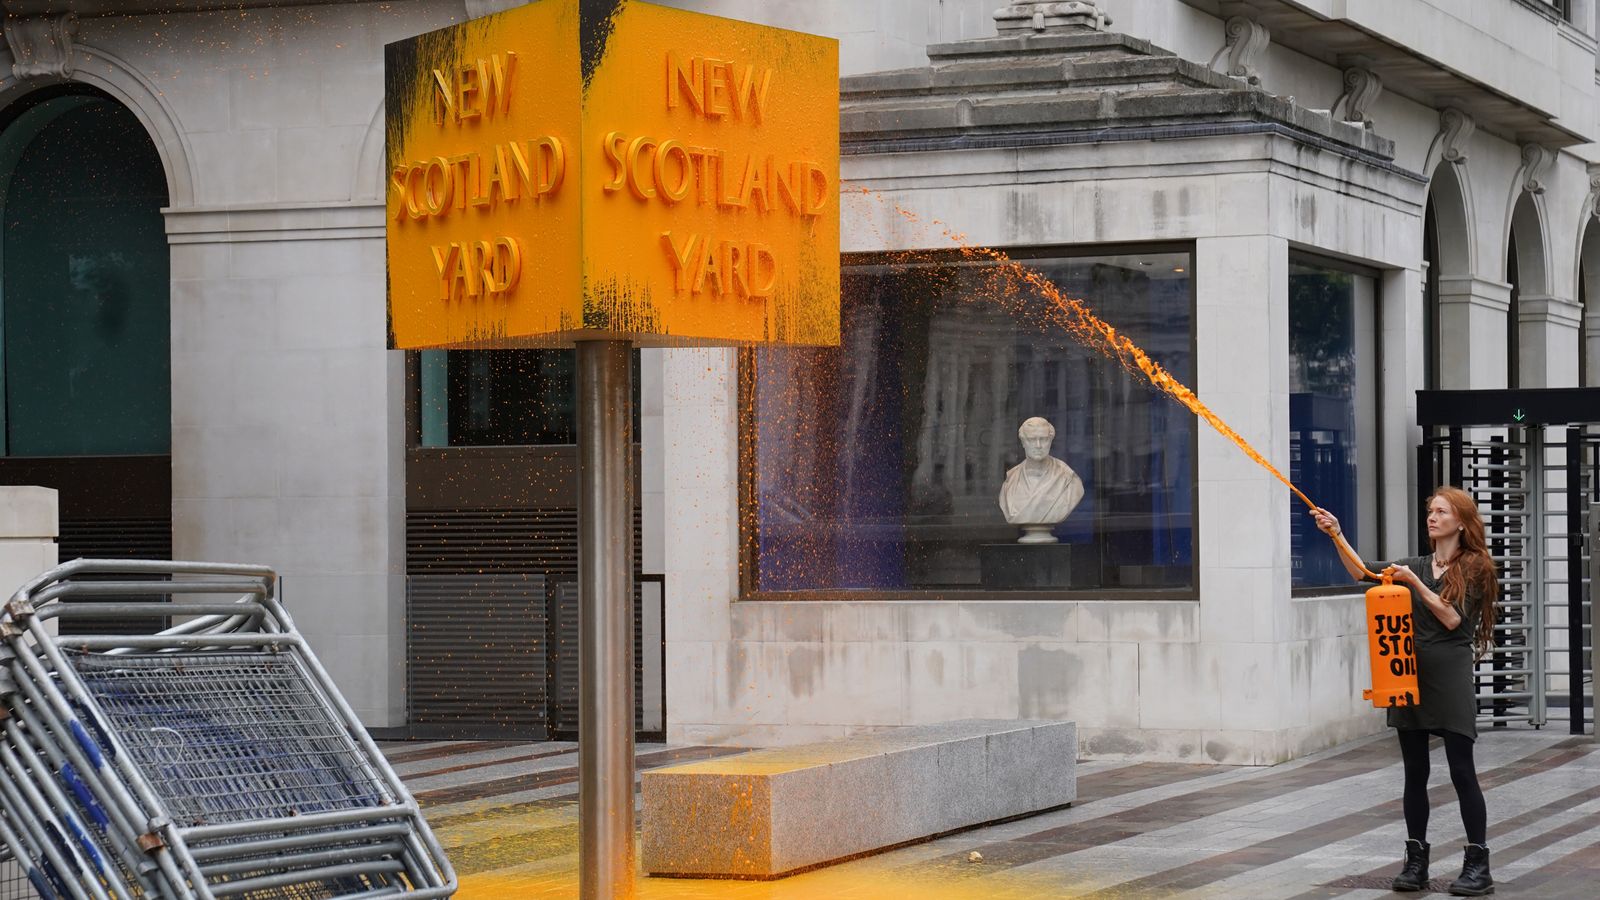 Just Stop Oil protesters spray paint New Scotland Yard, UK News